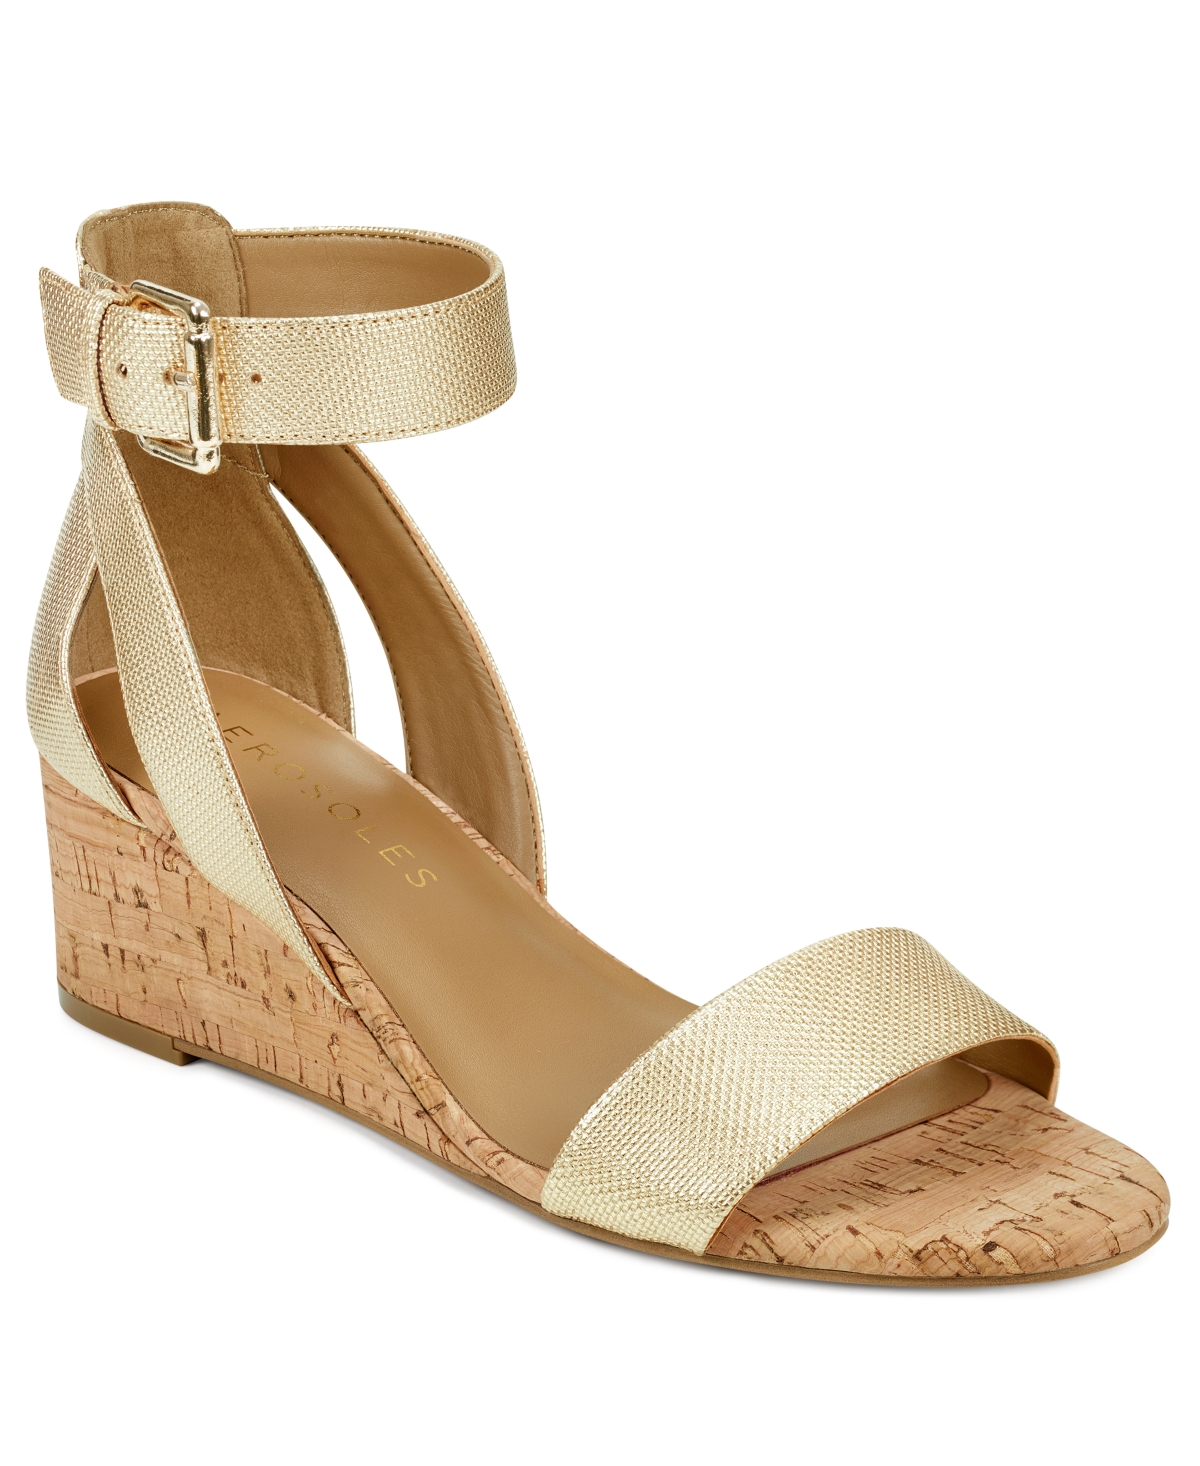 UPC 887039887679 product image for Aerosoles Willowbrook Wedge Sandals Women's Shoes | upcitemdb.com